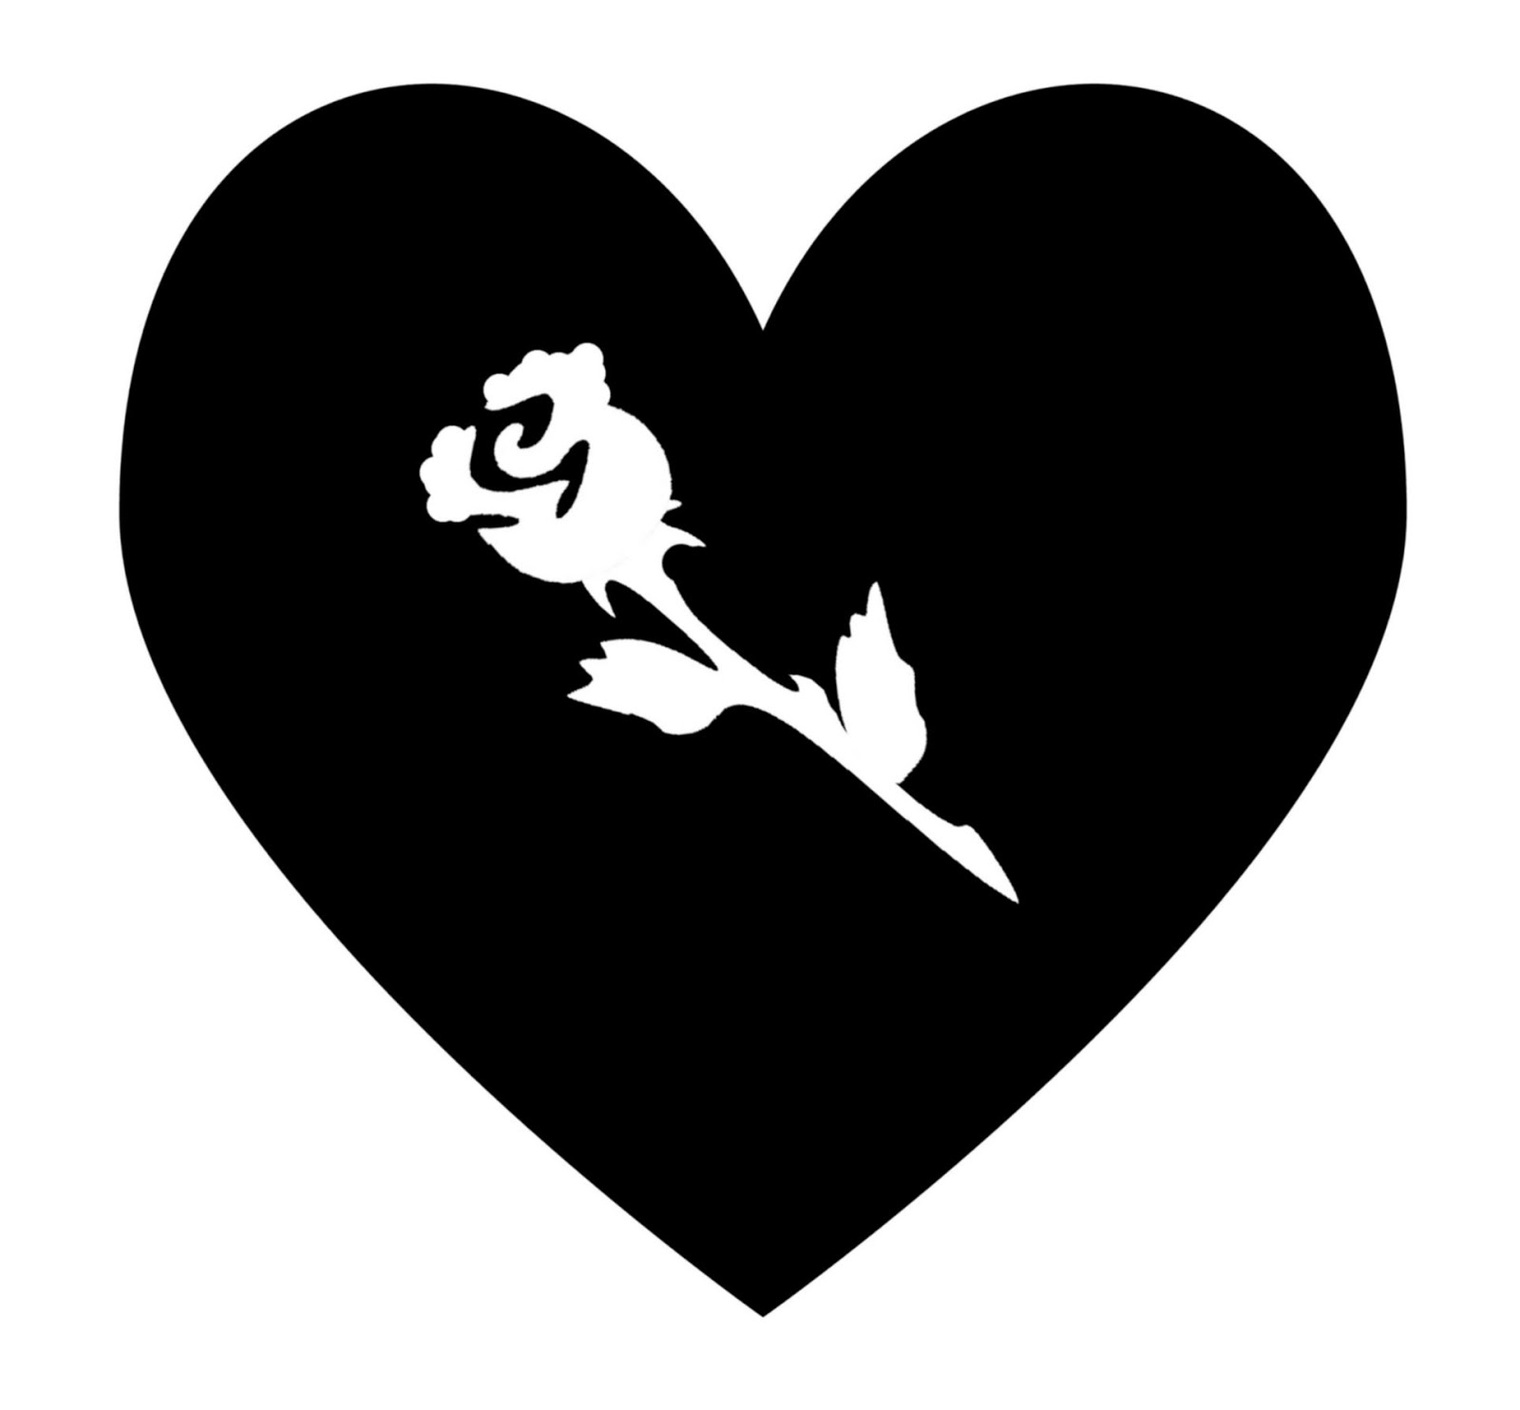 Heart Silhouette Clipart - Free to use Clip Art Resource - ClipArt Best ...